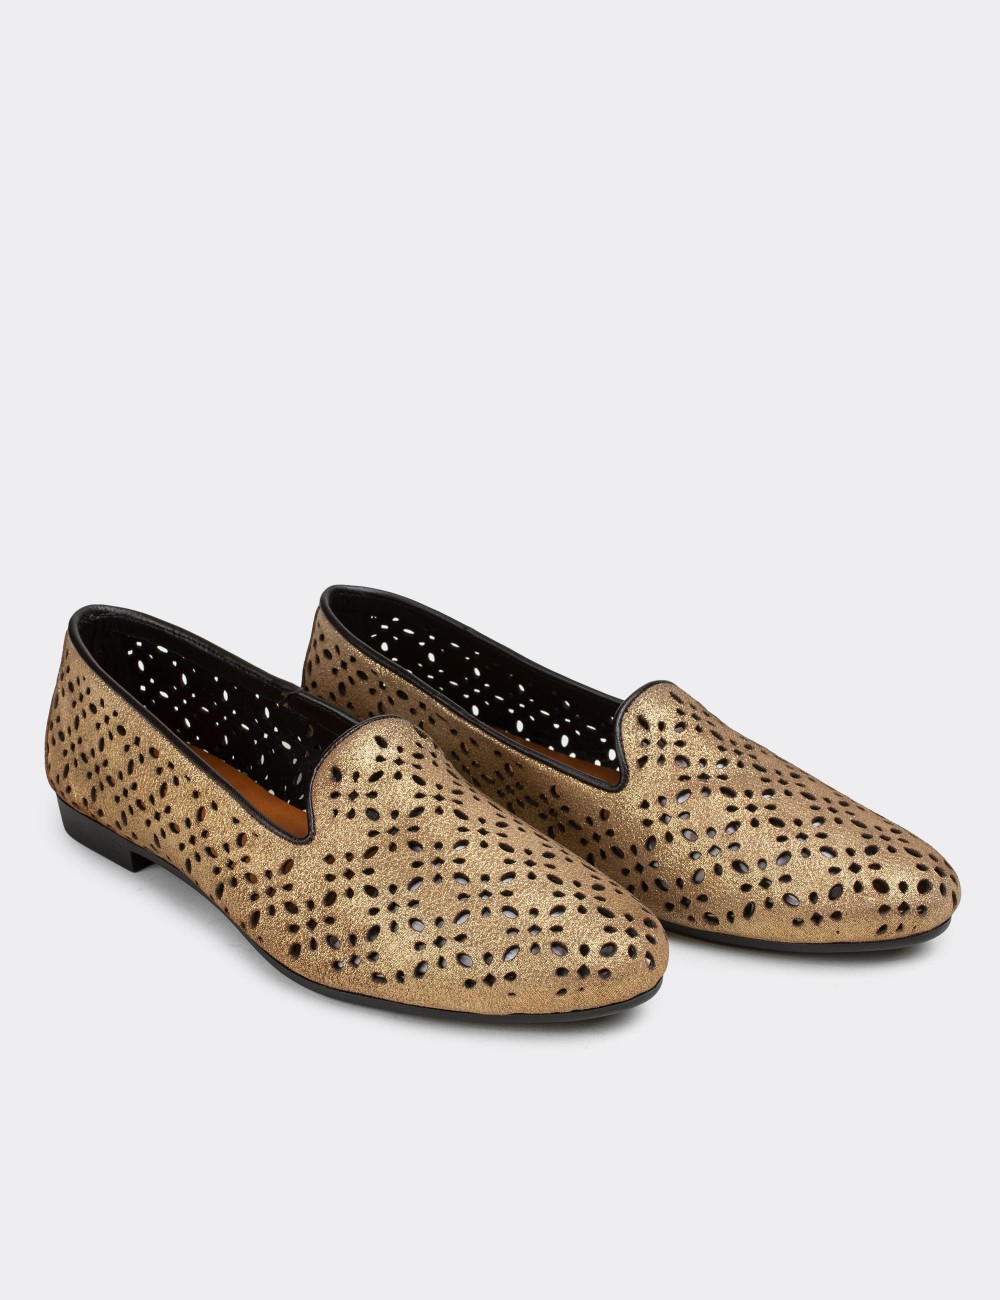 Gold Suede Leather Loafers  - E3208ZALTC04